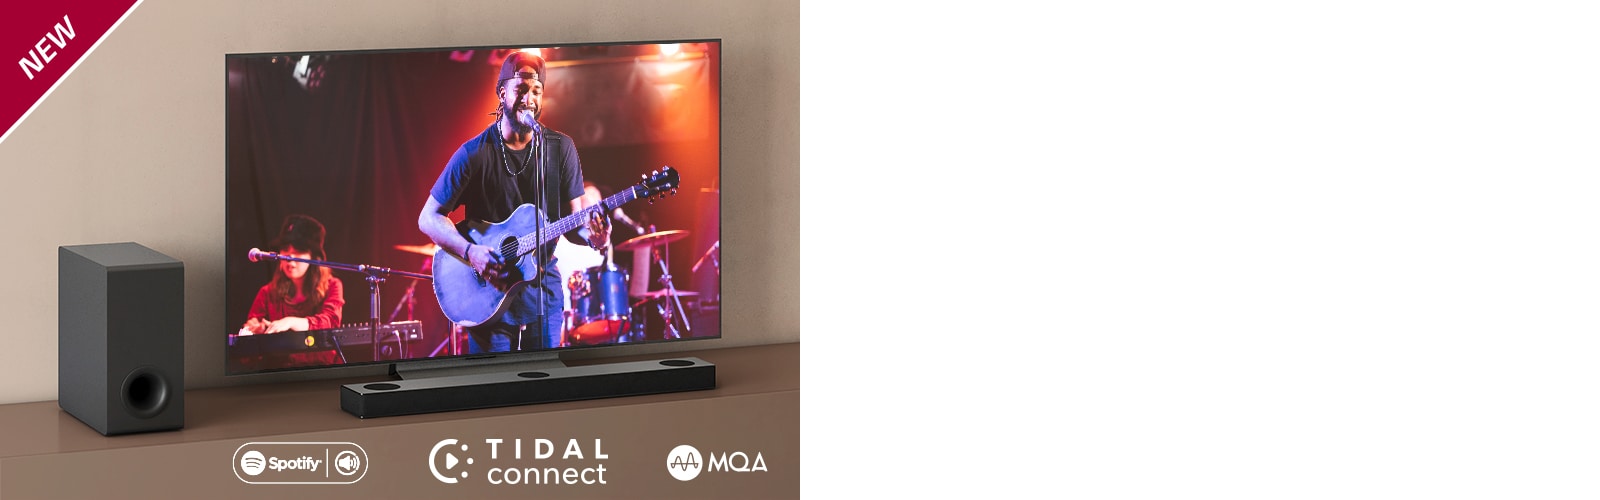 LG TV is placed on the brown shelf, LG Sound Bar S80QY is placed in front of the TV. Subwoofer is placed left side of the TV. TV shows a concerts scene. NEW mark is shown in the top left corner.